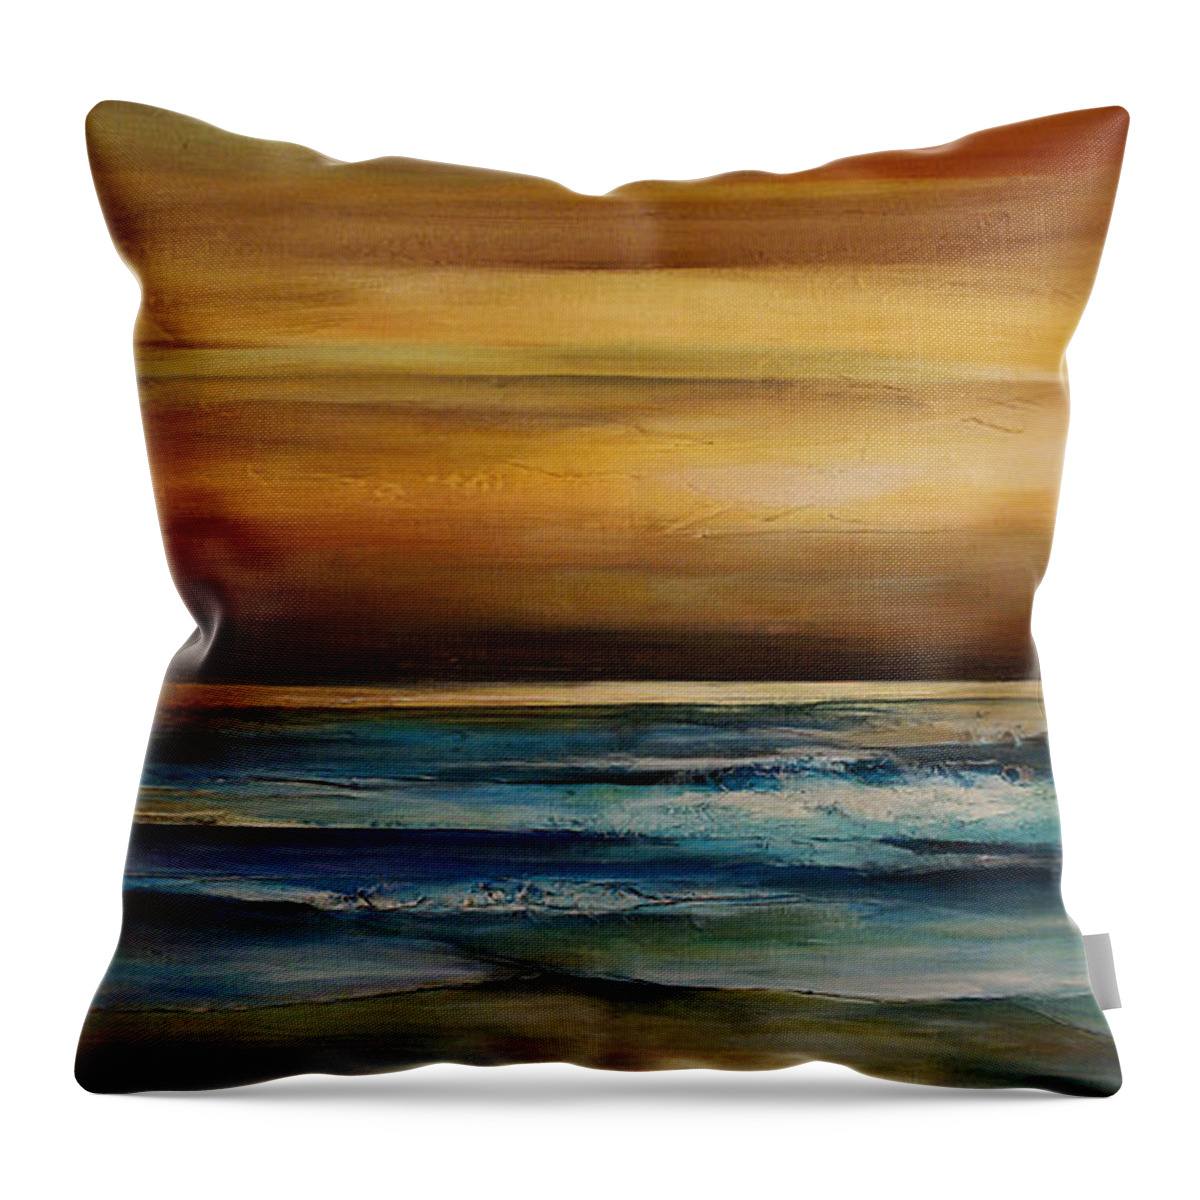 Seascape Throw Pillow featuring the painting Seascape 1 by Michael Lang